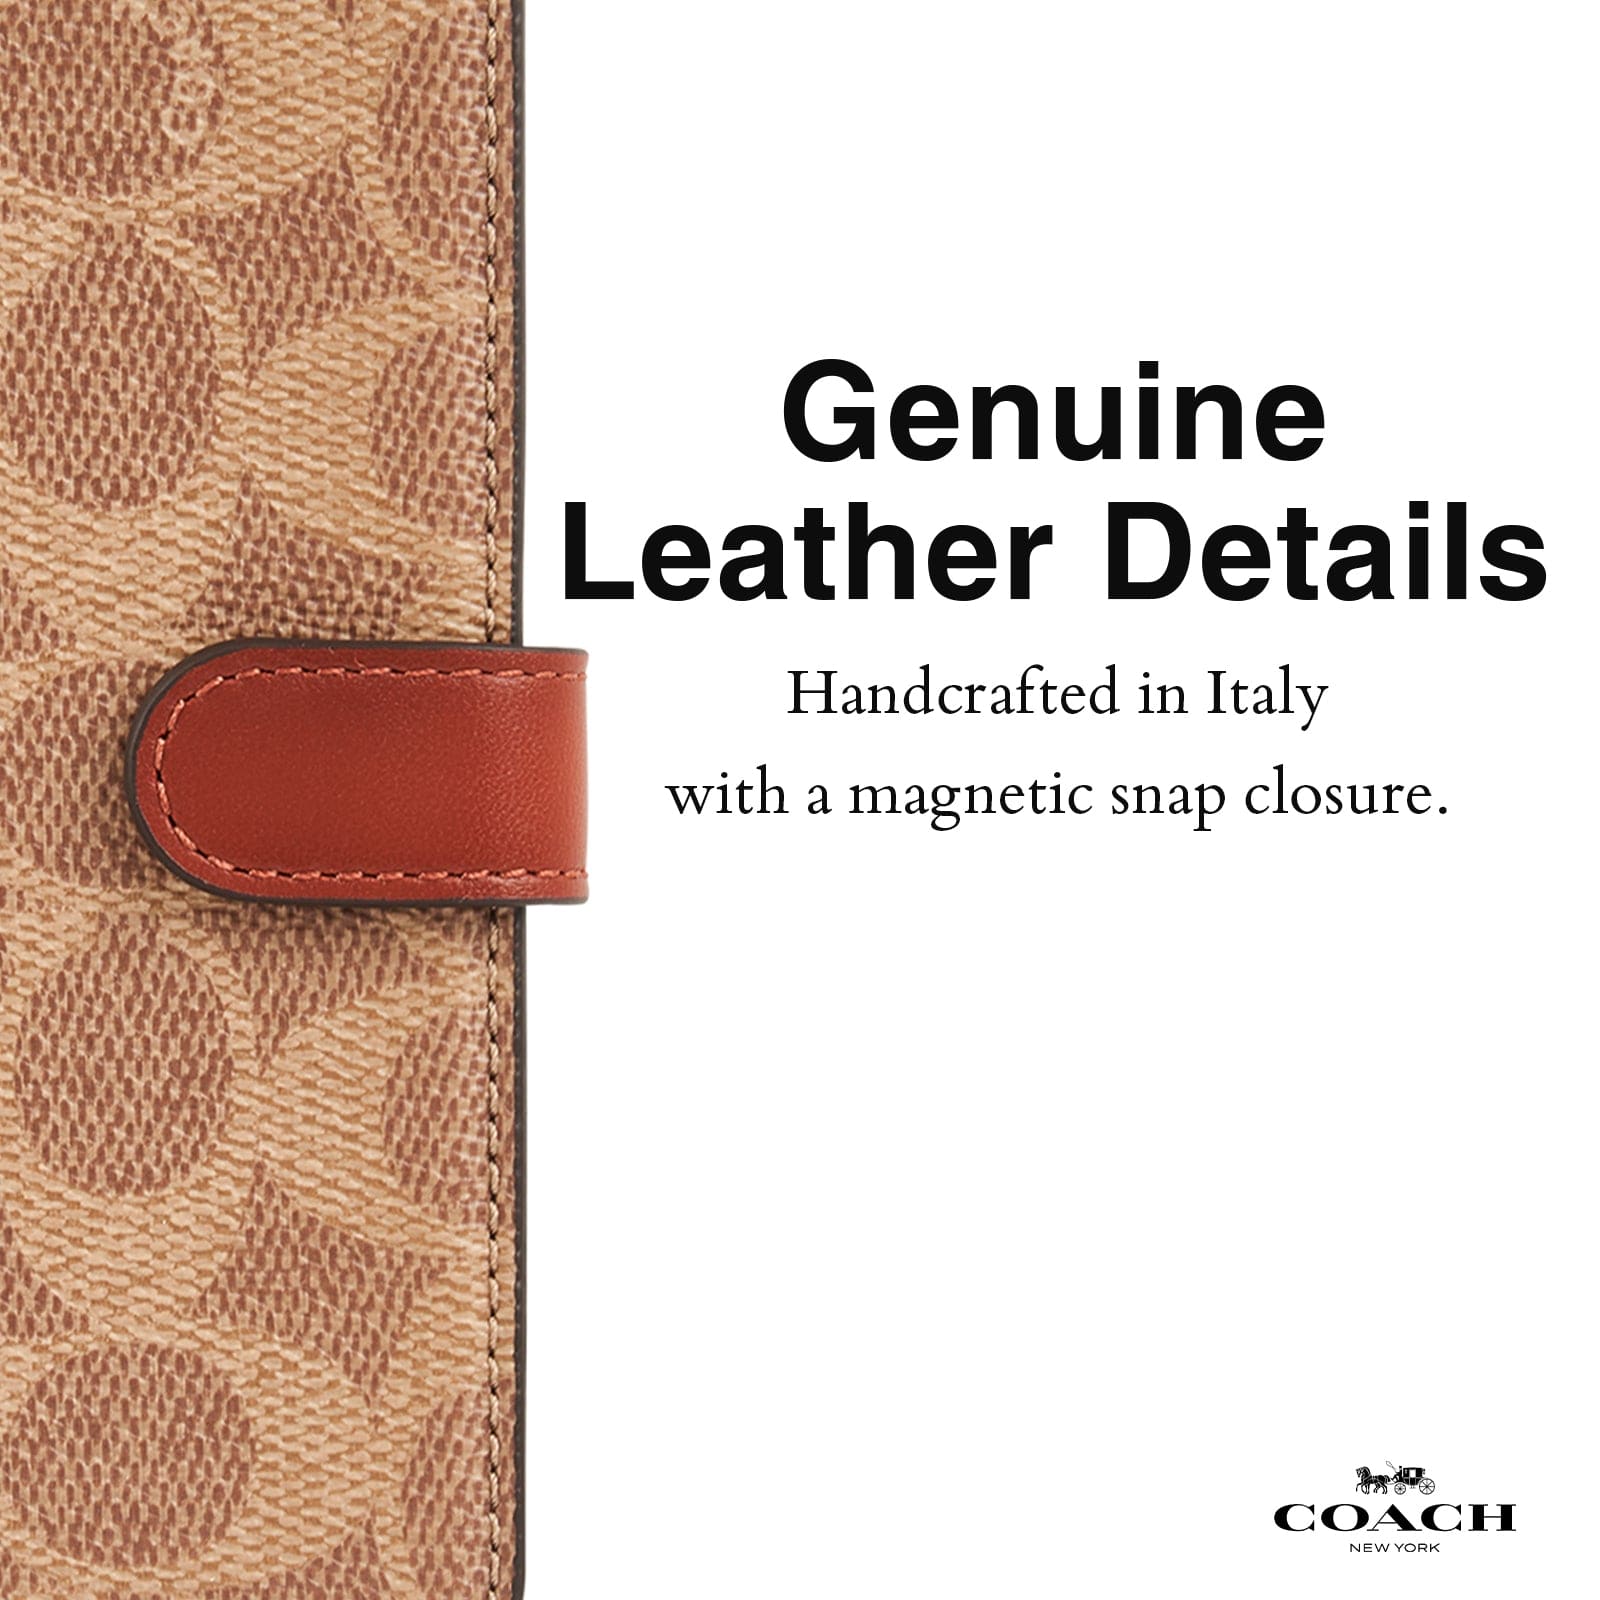 GENUINE LEATHER DETAILS. HANDCRAFTED IN ITALY WITH A MAGNETIC SNAP CLOSURE